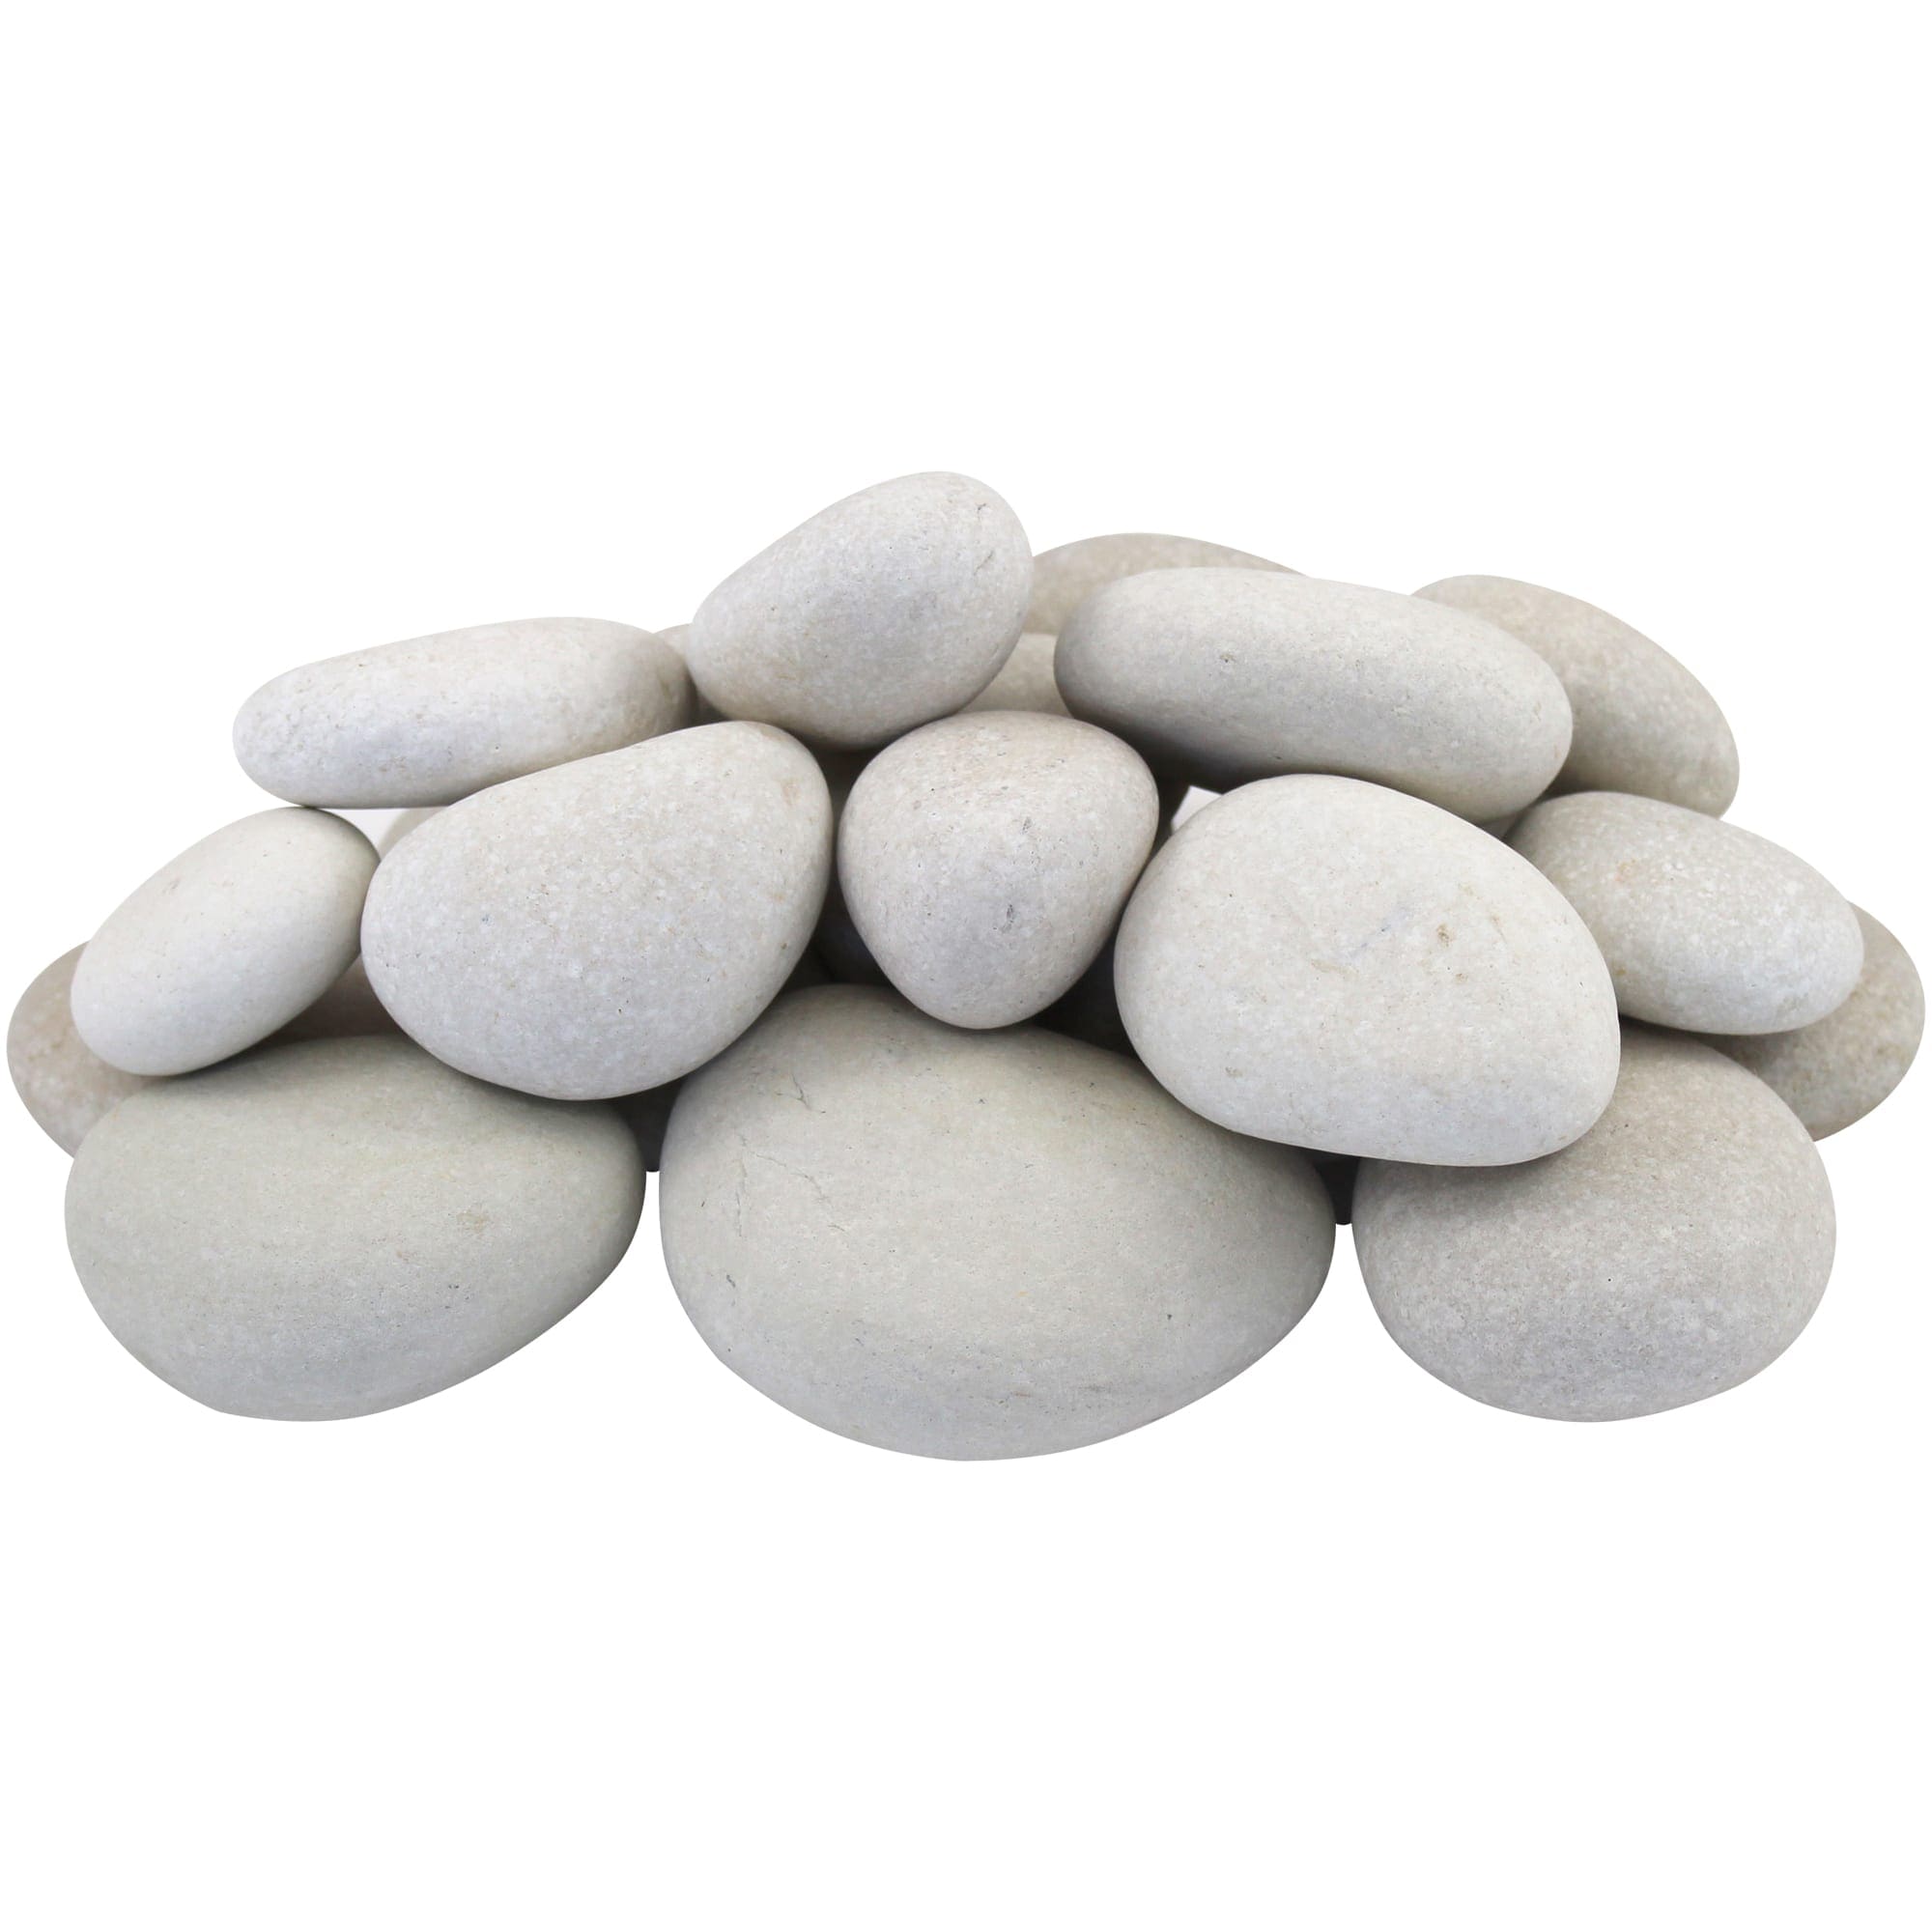 30 River Rocks for Painting, Painting Rocks Bulk, Smooth Rocks for